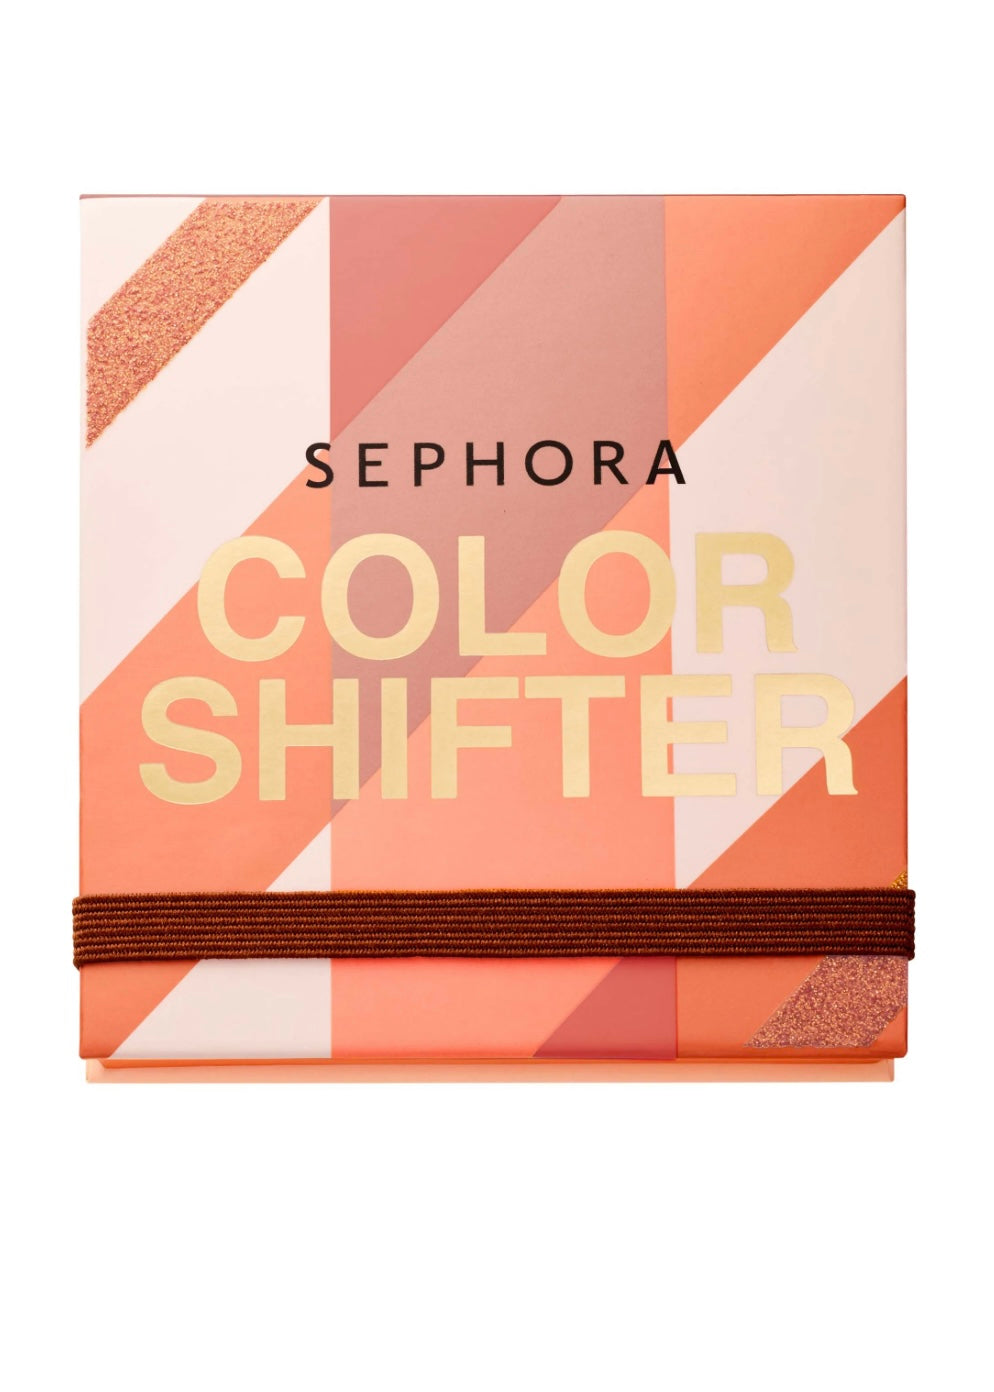 SEPHORA COLLECTION
Color Shifter Mini Eyeshadow Palette